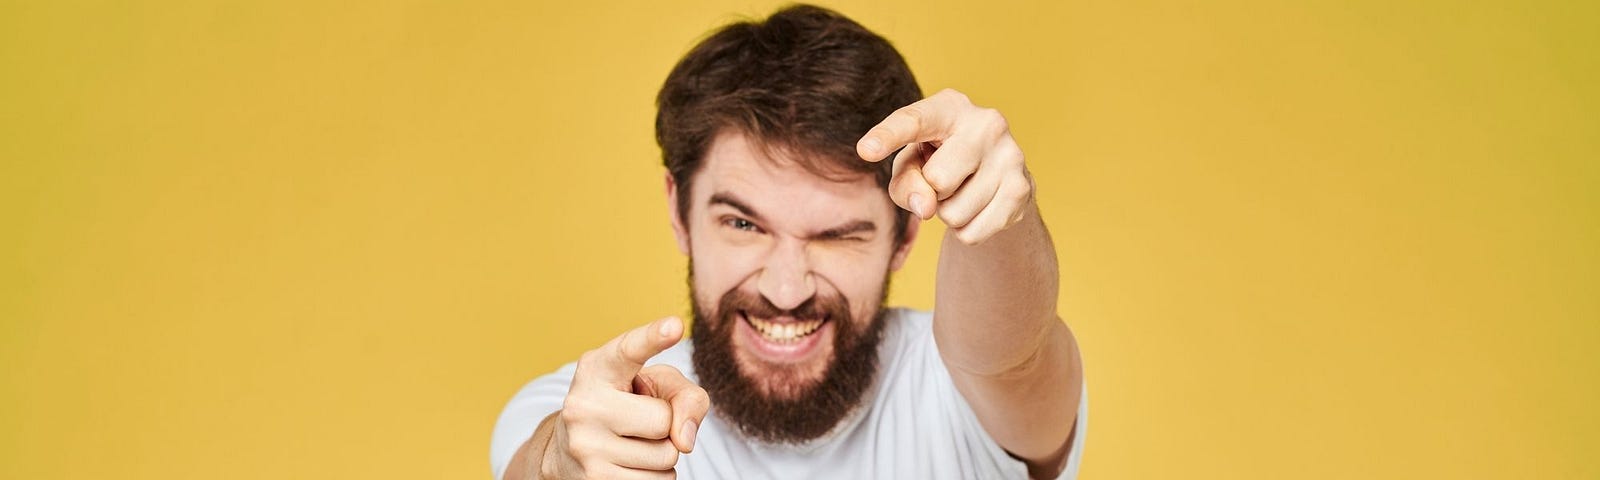 Gary, 25, with Hypersocial Disorder, Meets a Girl at the Support Group — A Bearded Man on a Yellow Background Makes a Shot Gesture